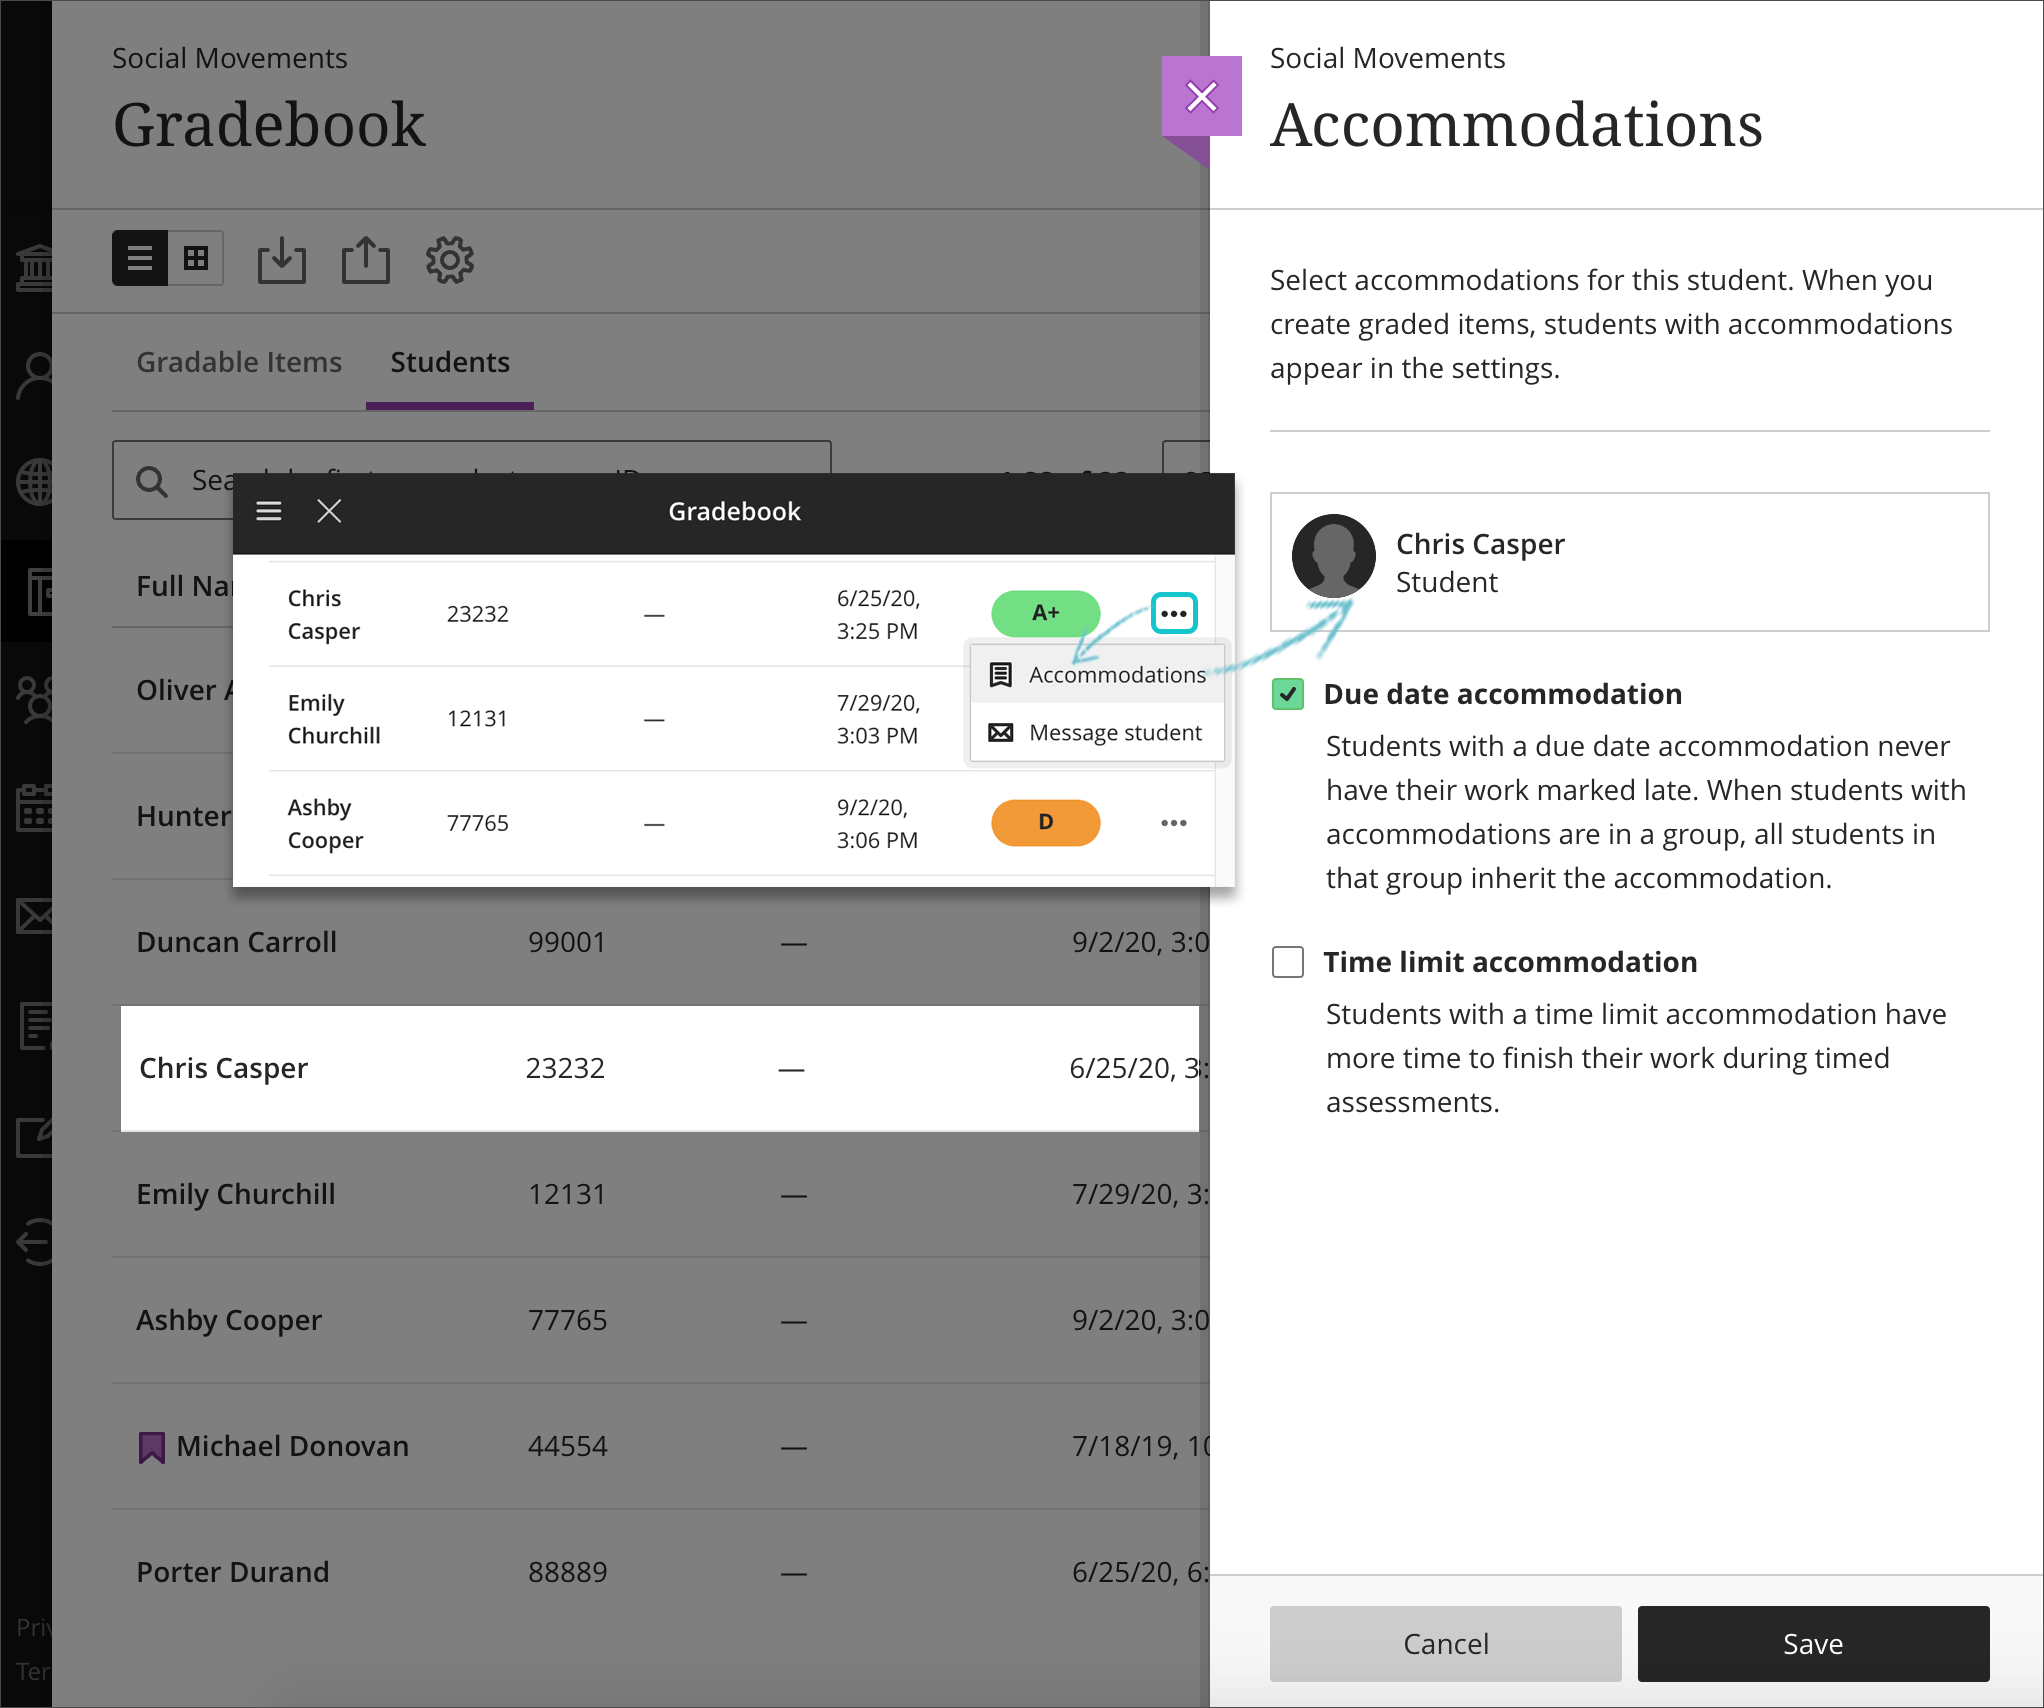 Select the three dot options menu at the right end of a student row. Select the Accommodations option. The Accommodations panel will open at the right side of the screen.